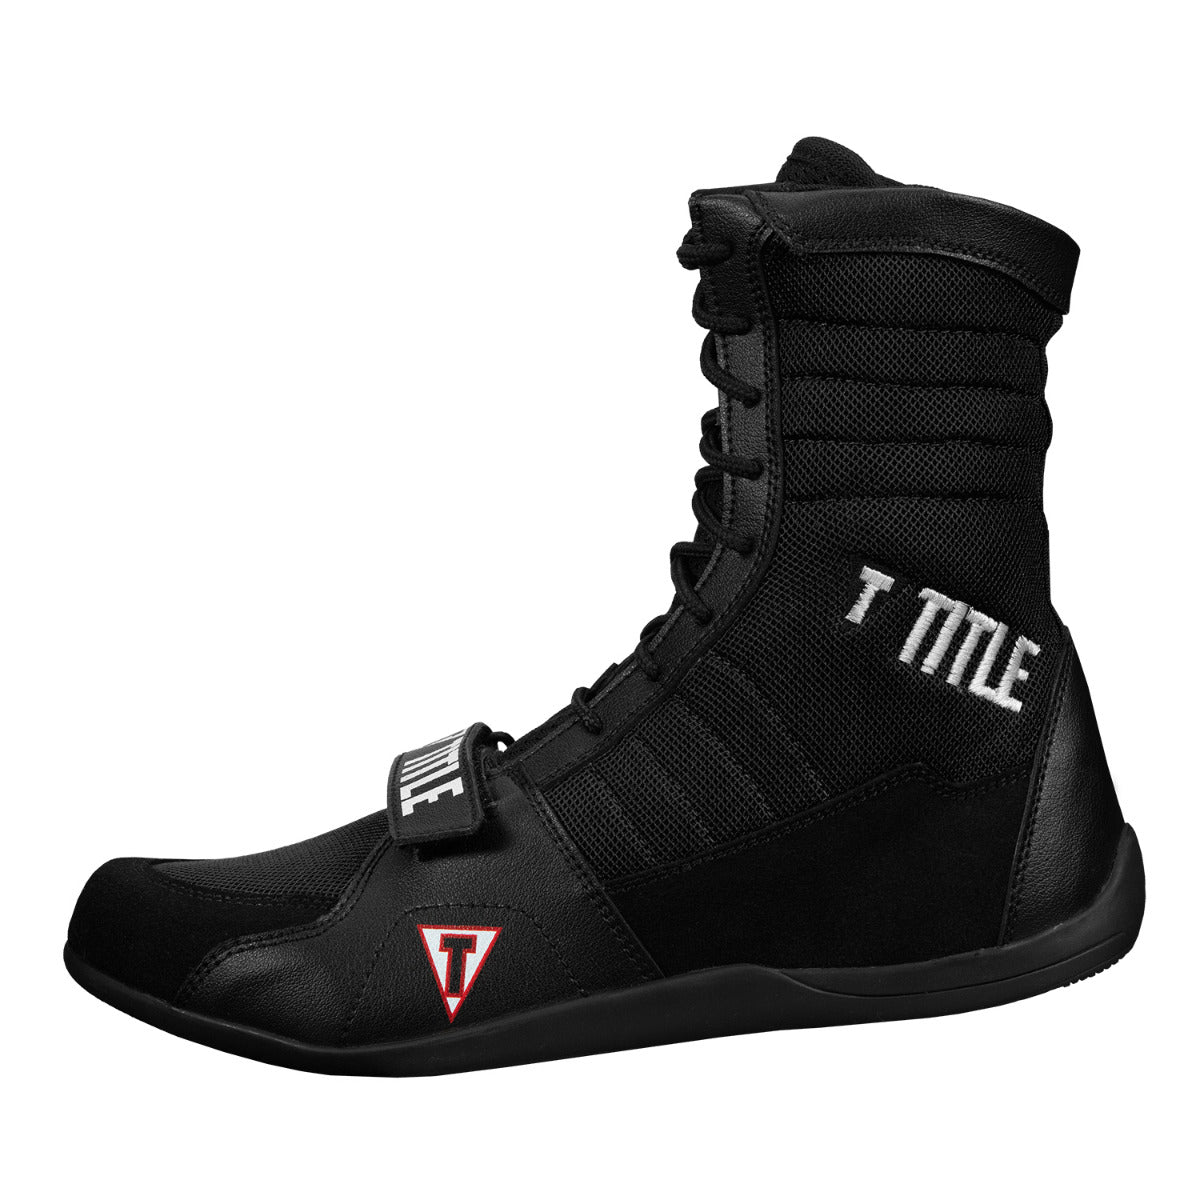 TITLE Ring Freak Boxing Shoes | TITLE Boxing Gear